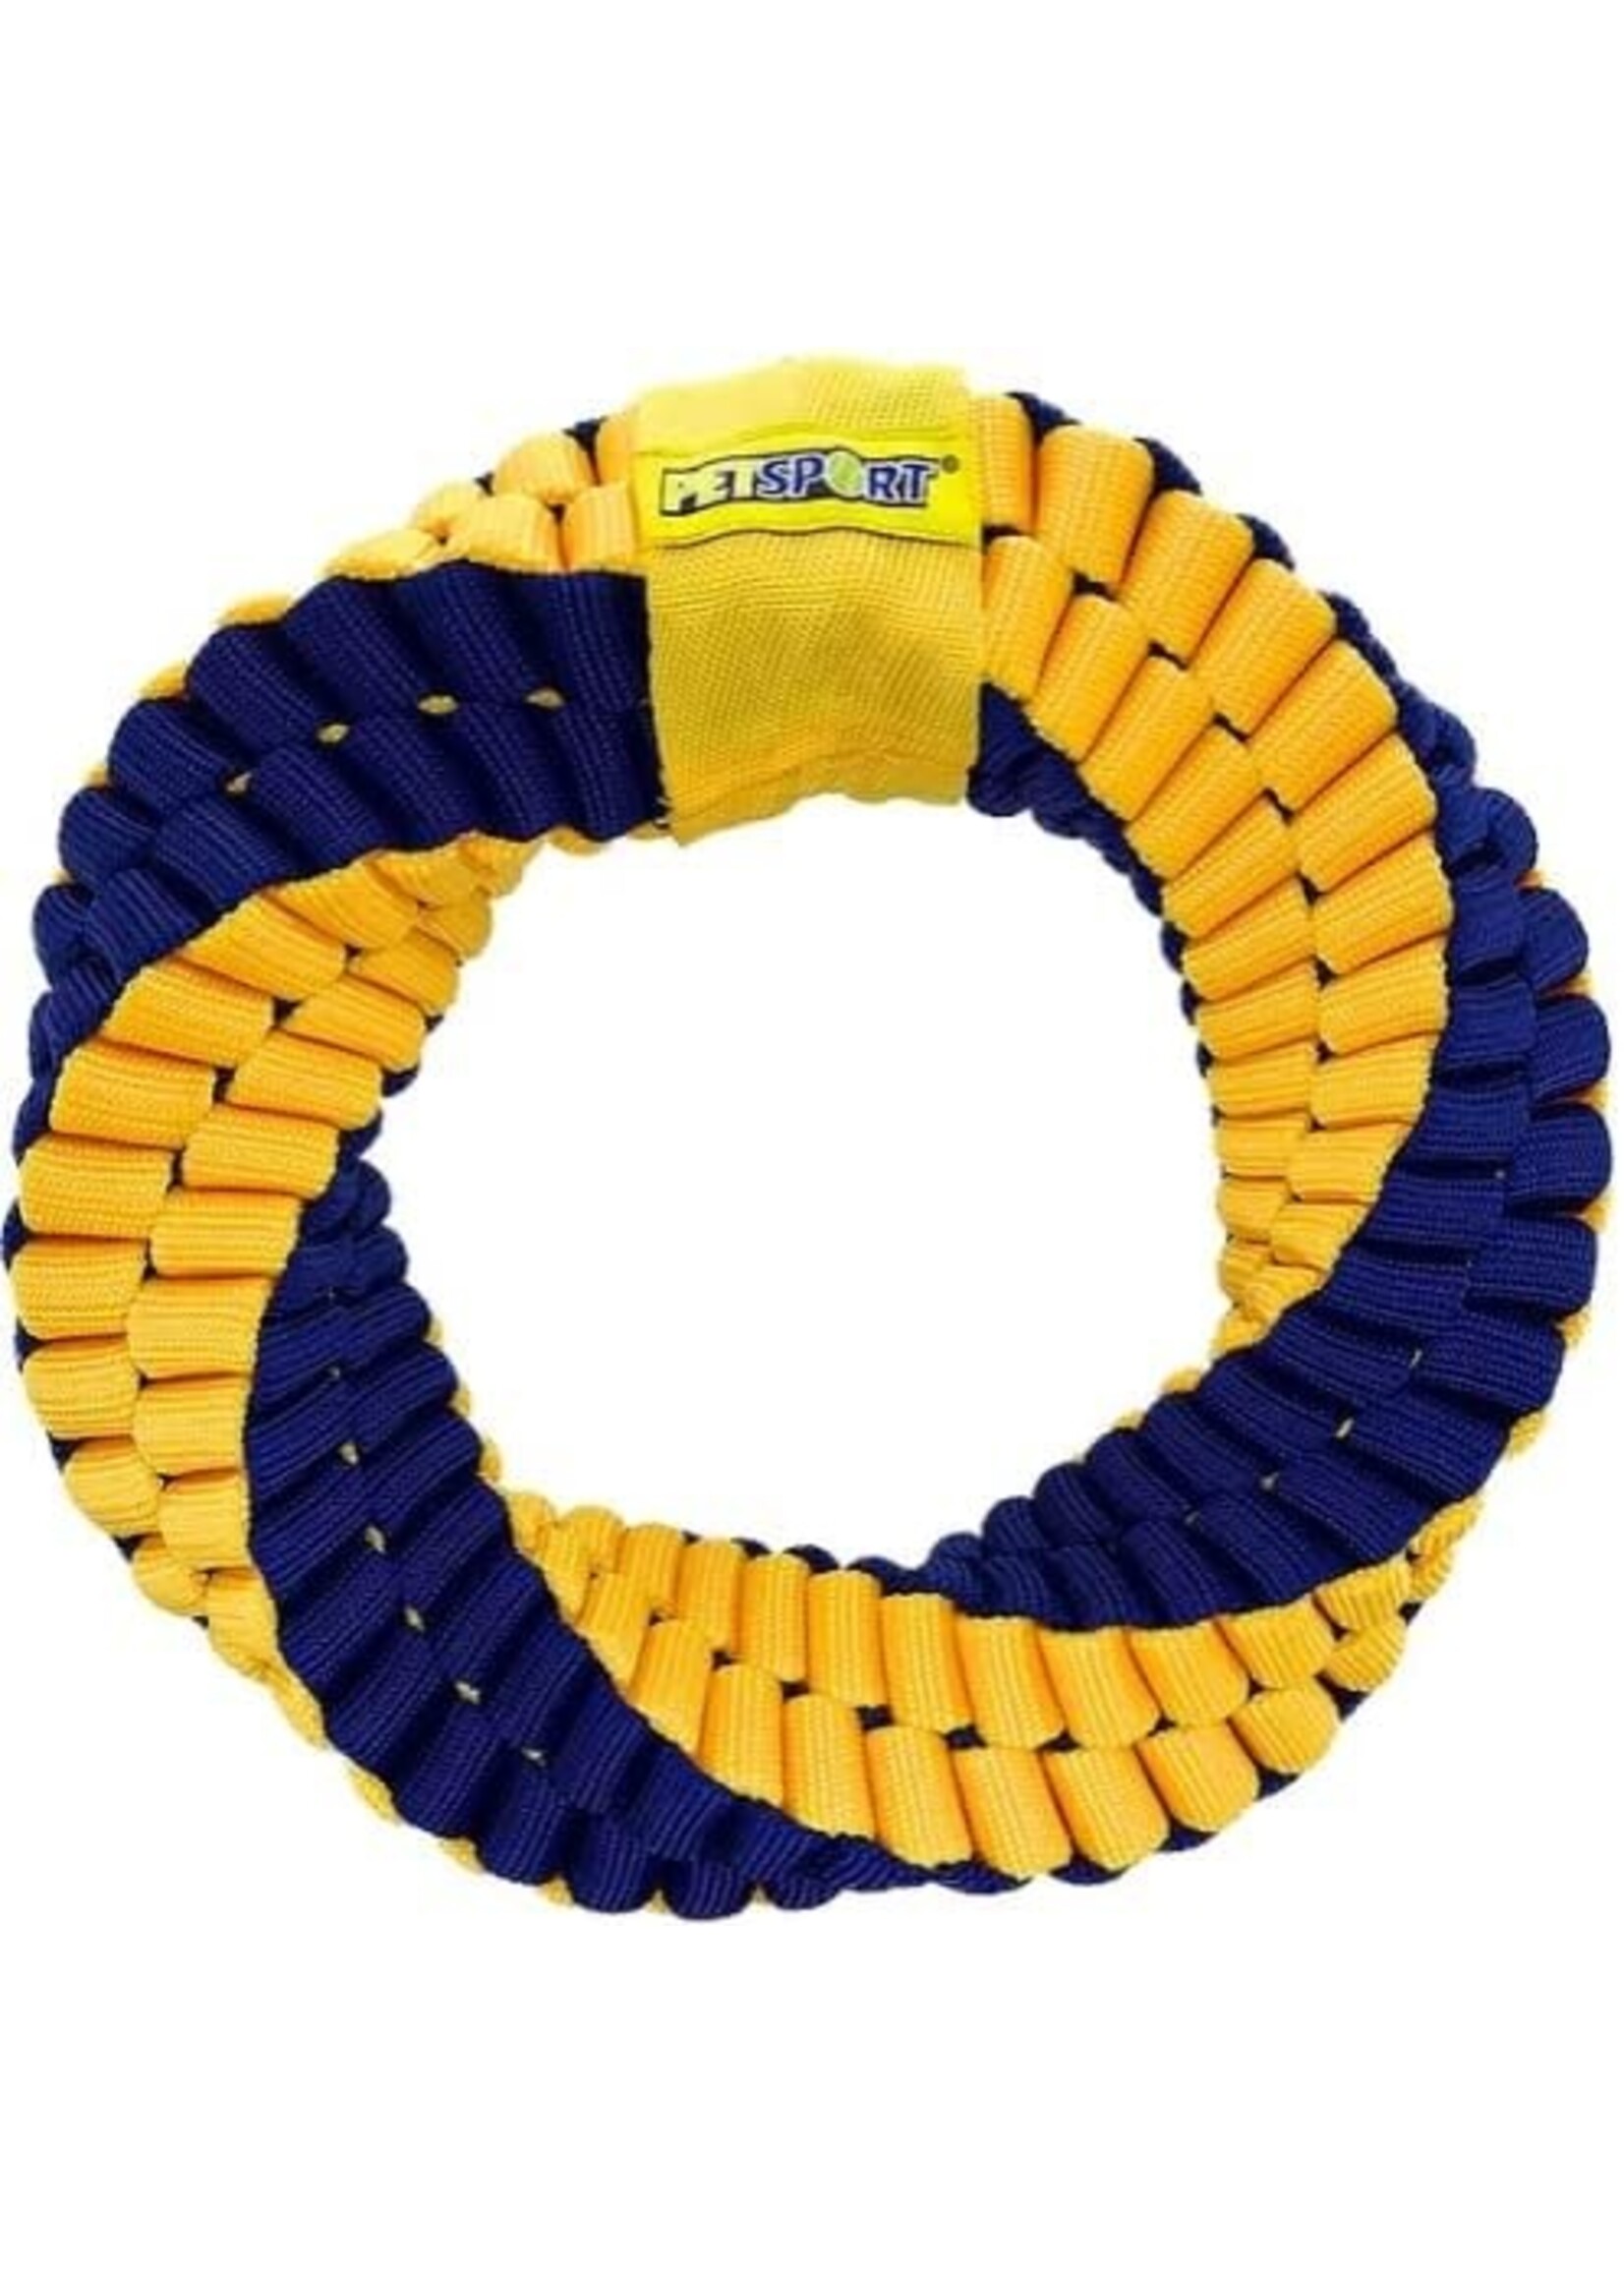 Petsport Petsport Twisted Chews Giant Infinity Ring